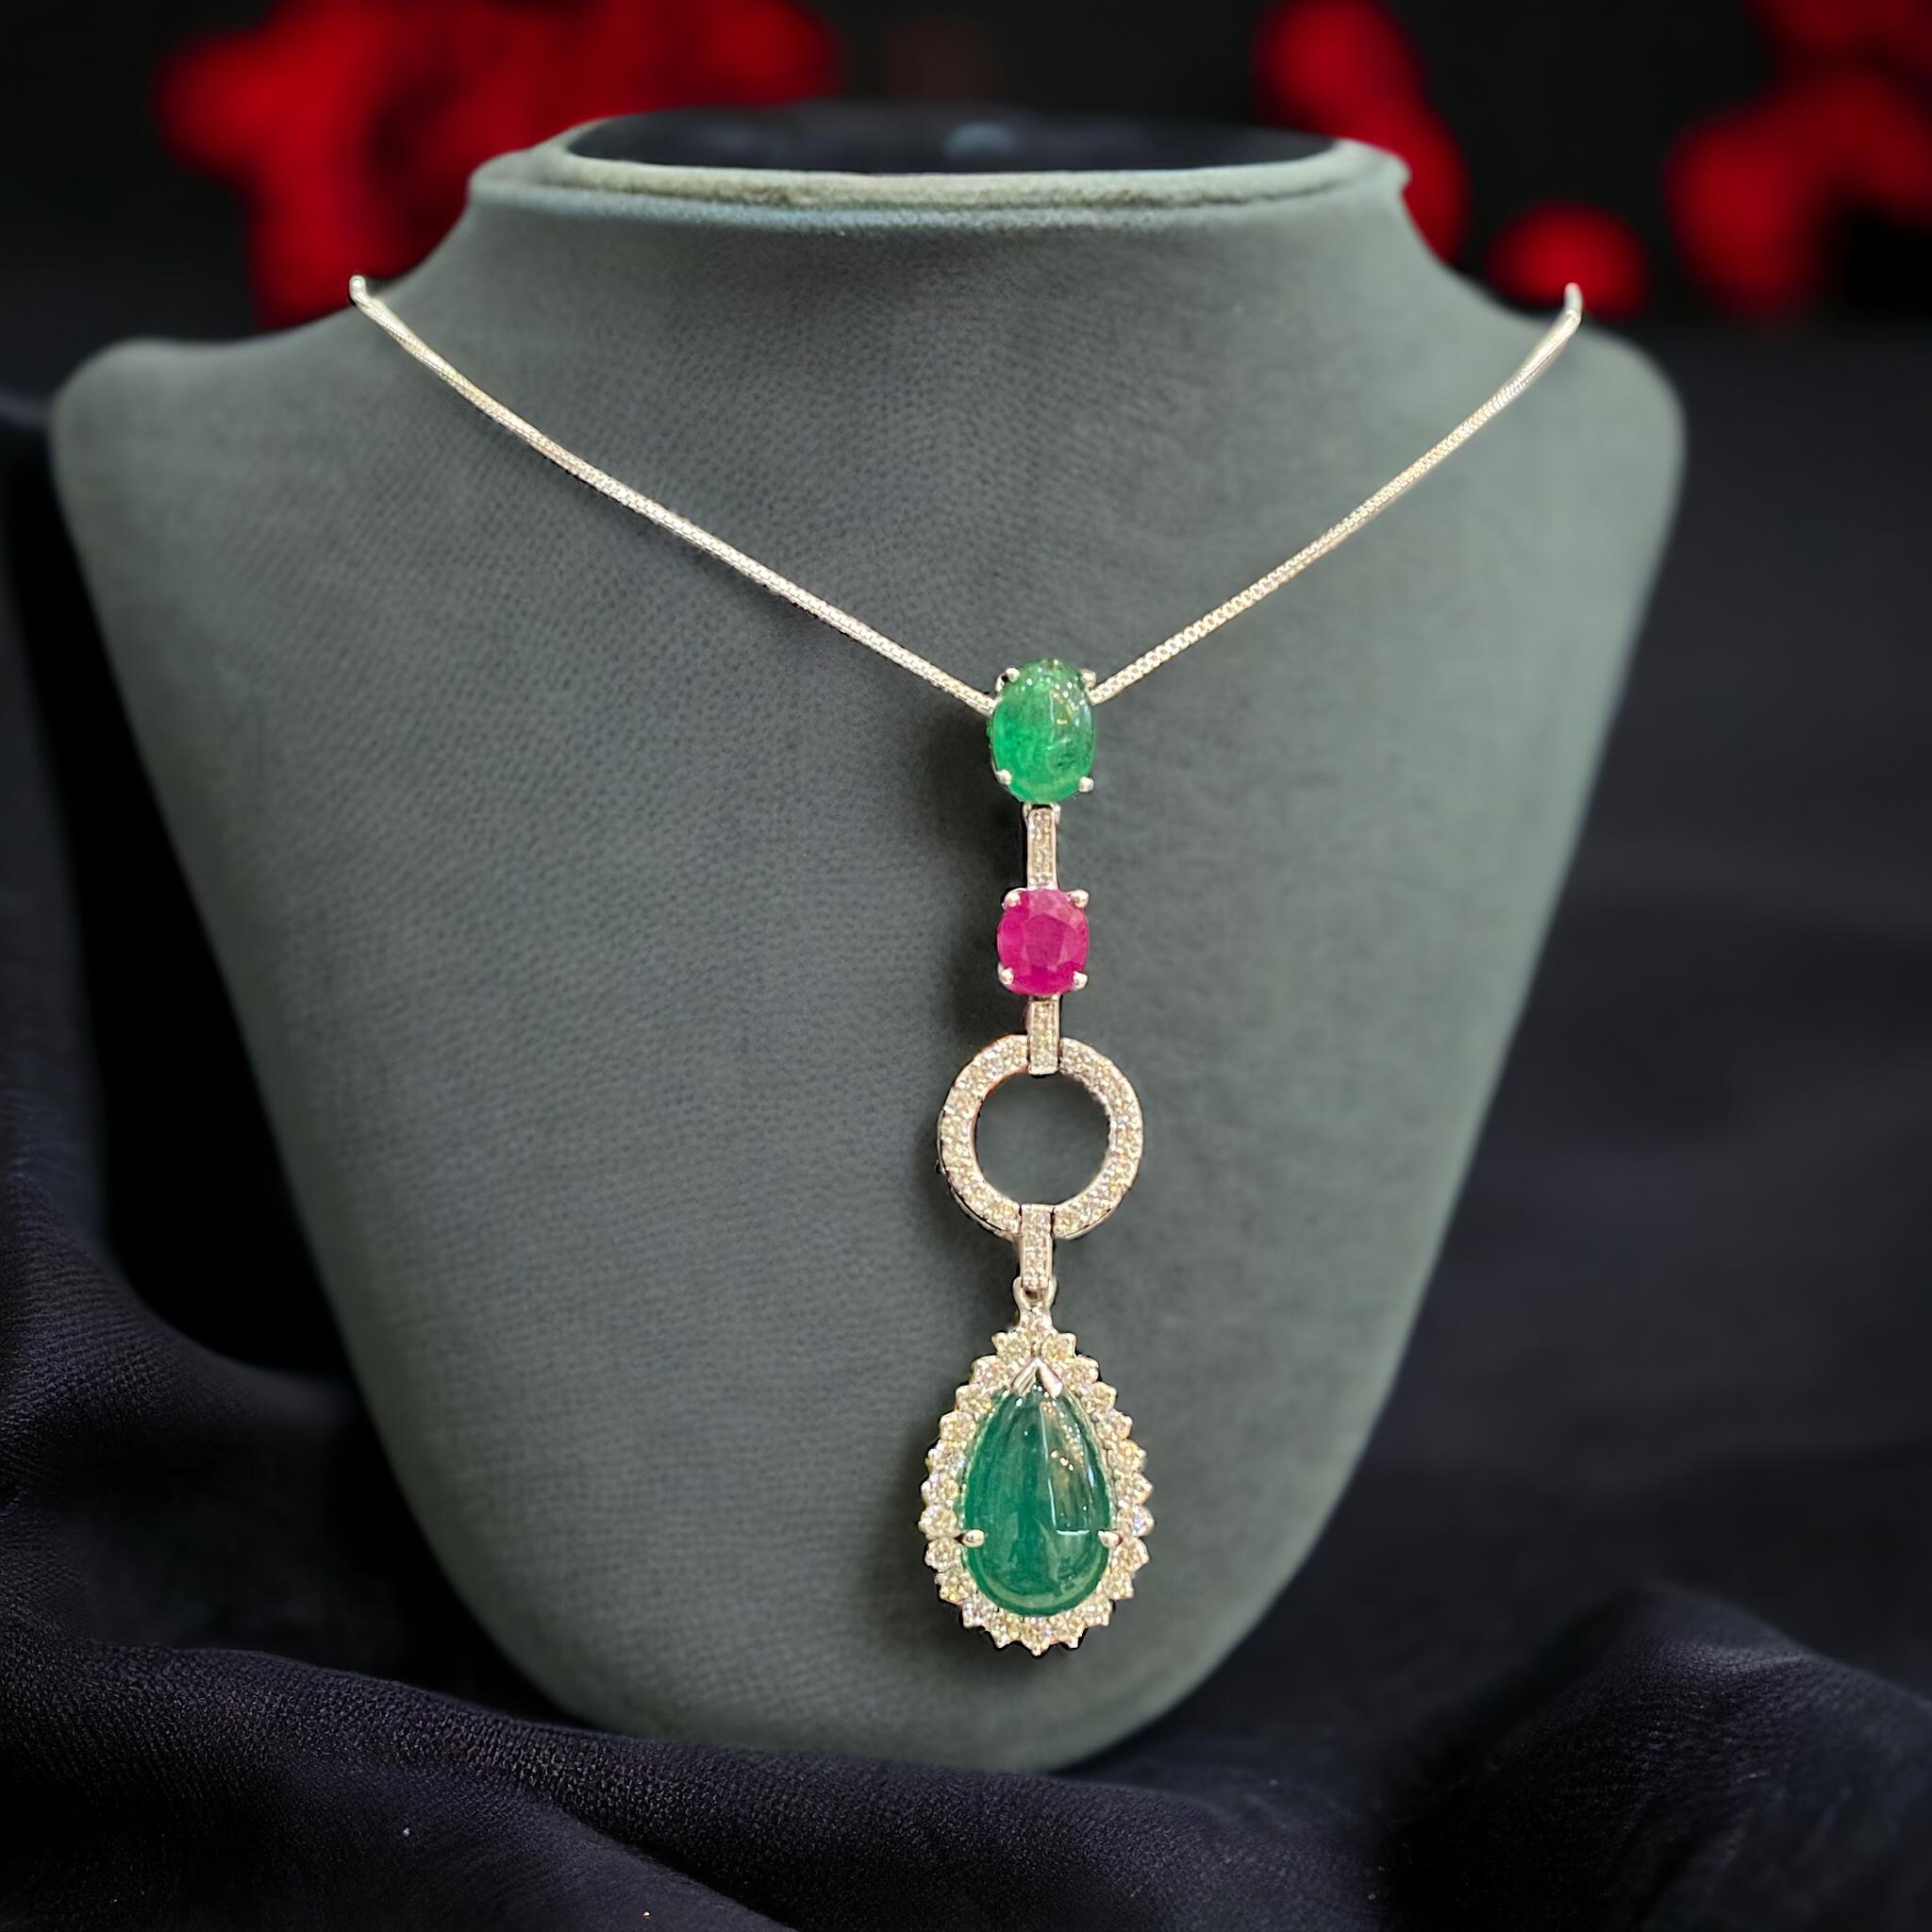 Embrace elegance and share joy with this intricately crafted necklace boasting 1.66 carats of F/VS1 diamonds, 1.50 carats of ruby, and a 6.05 carat emerald, ensuring flawless radiance!

Specifications : 

Diamond Weight : 1.66 Carats
Diamond Shape :